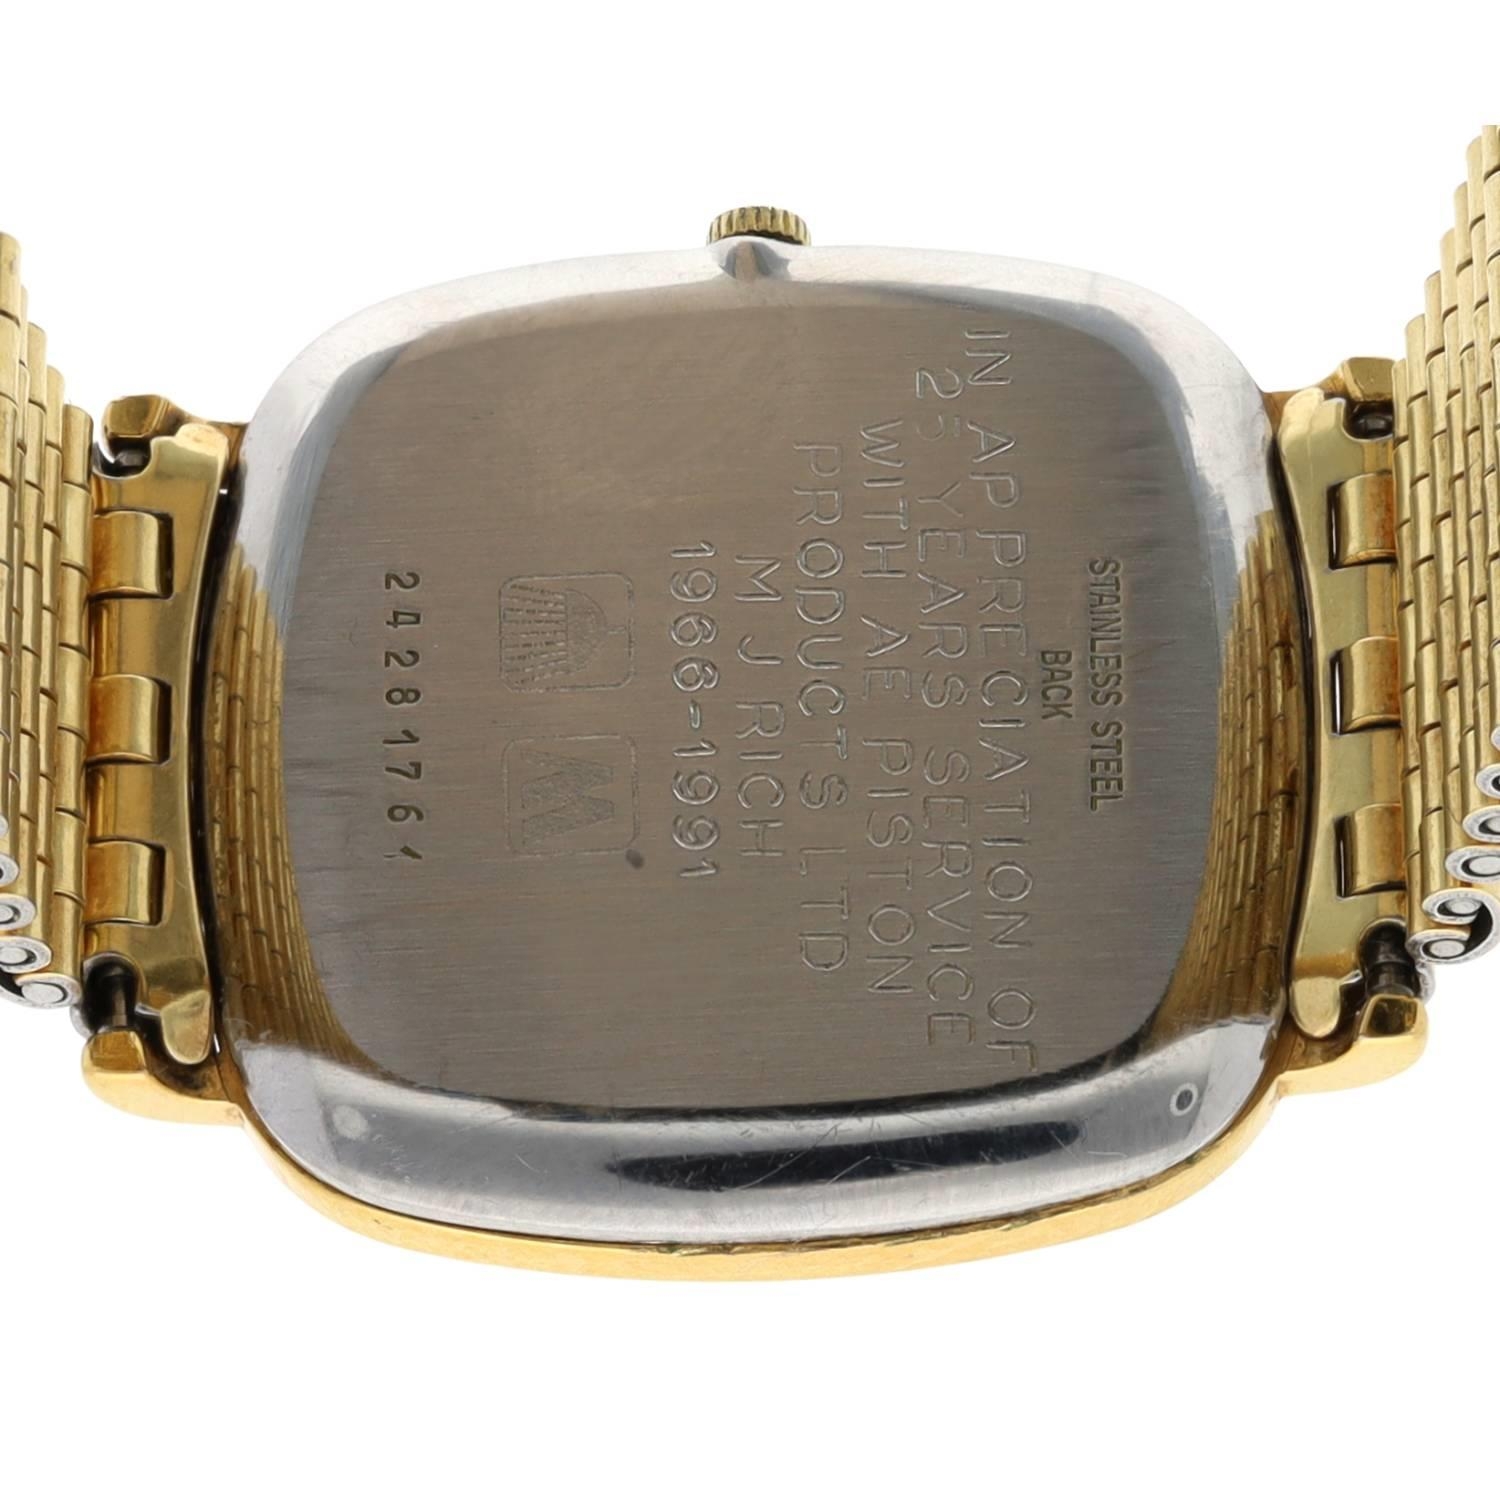 Longines Quartz square cased gold plated and stainless steel gentleman's wristwatch, case no. - Image 2 of 2